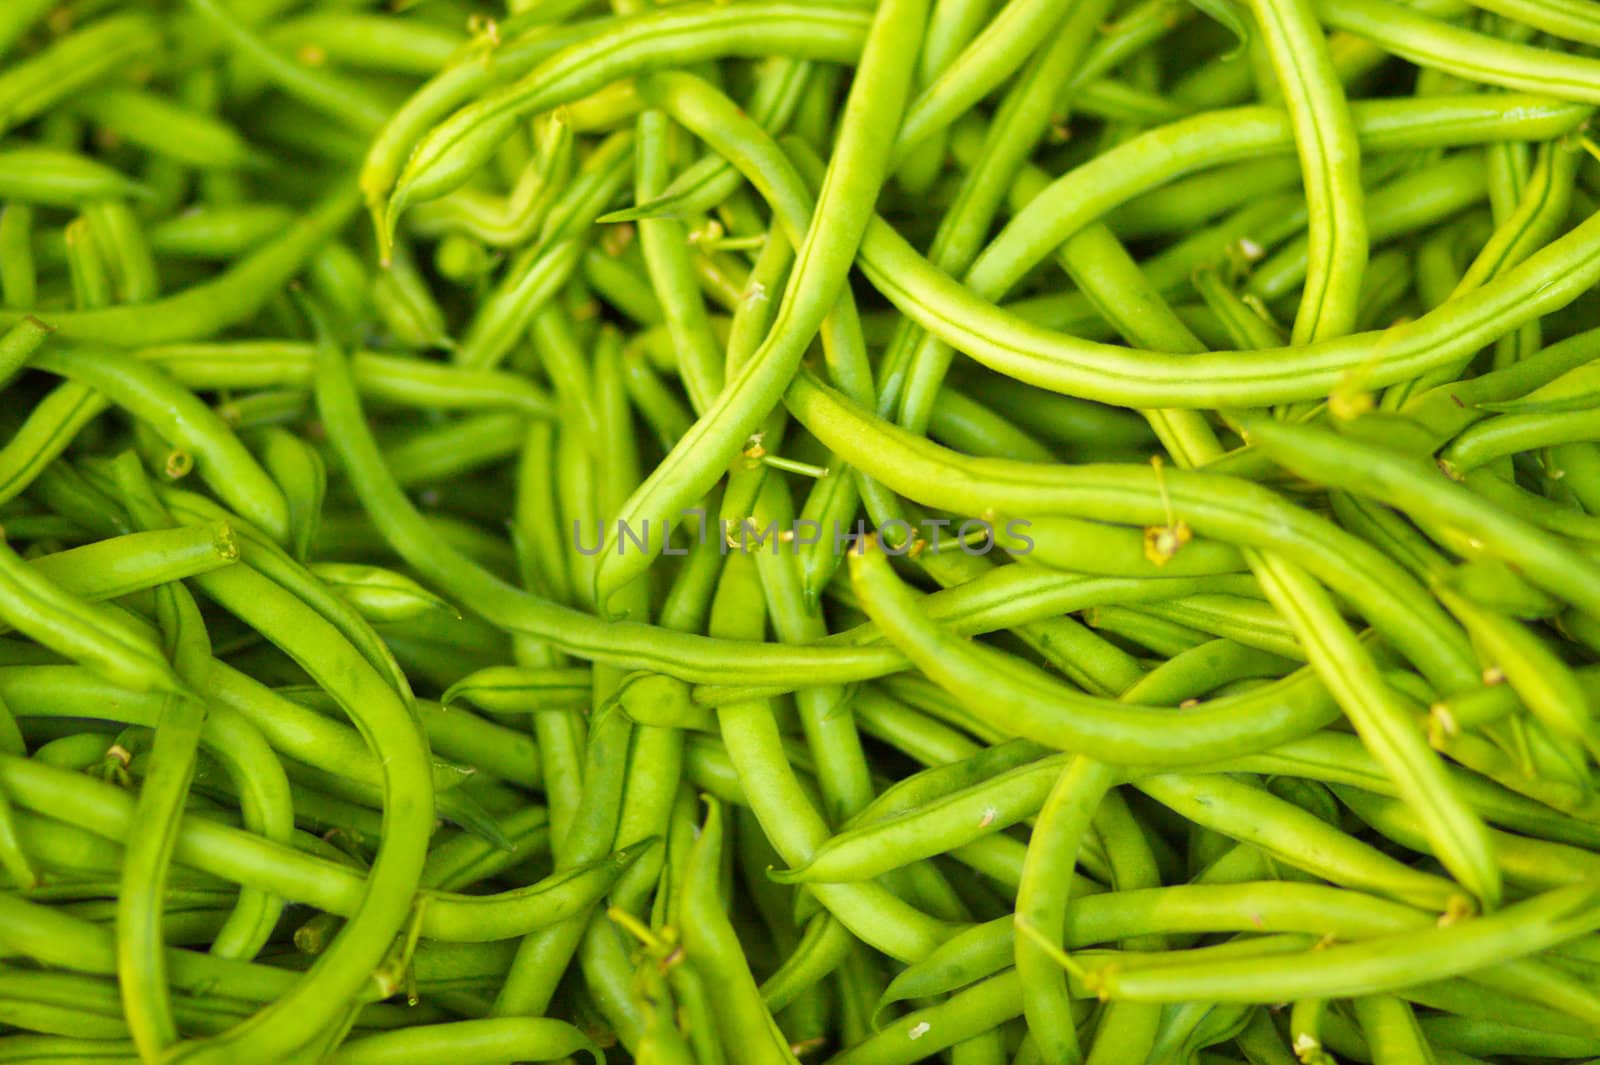 Pile of Green String Beans at the farmers market